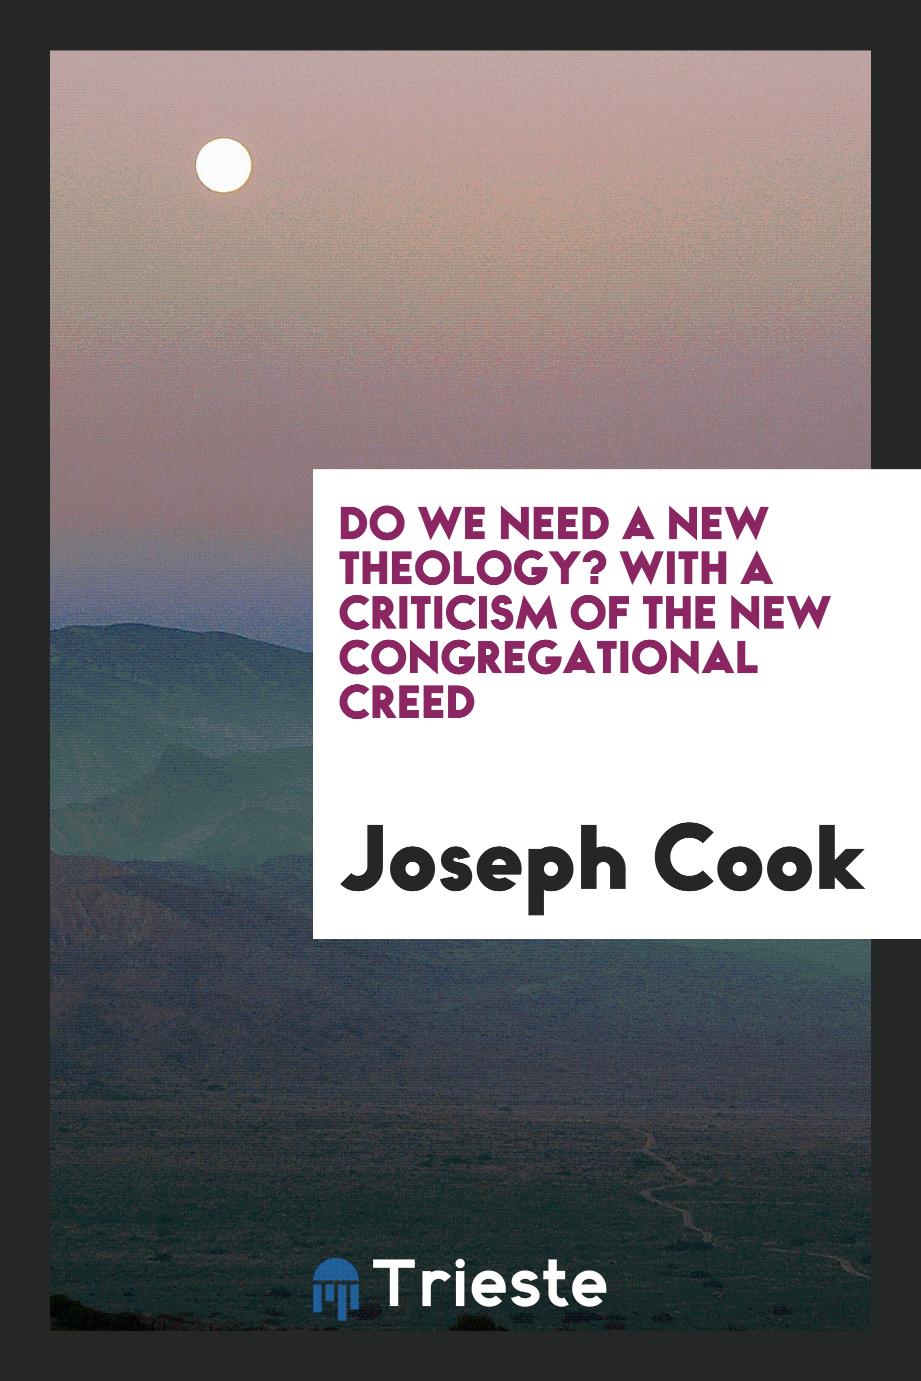 Joseph Cook - Do We Need a New Theology? With a Criticism of the New Congregational Creed